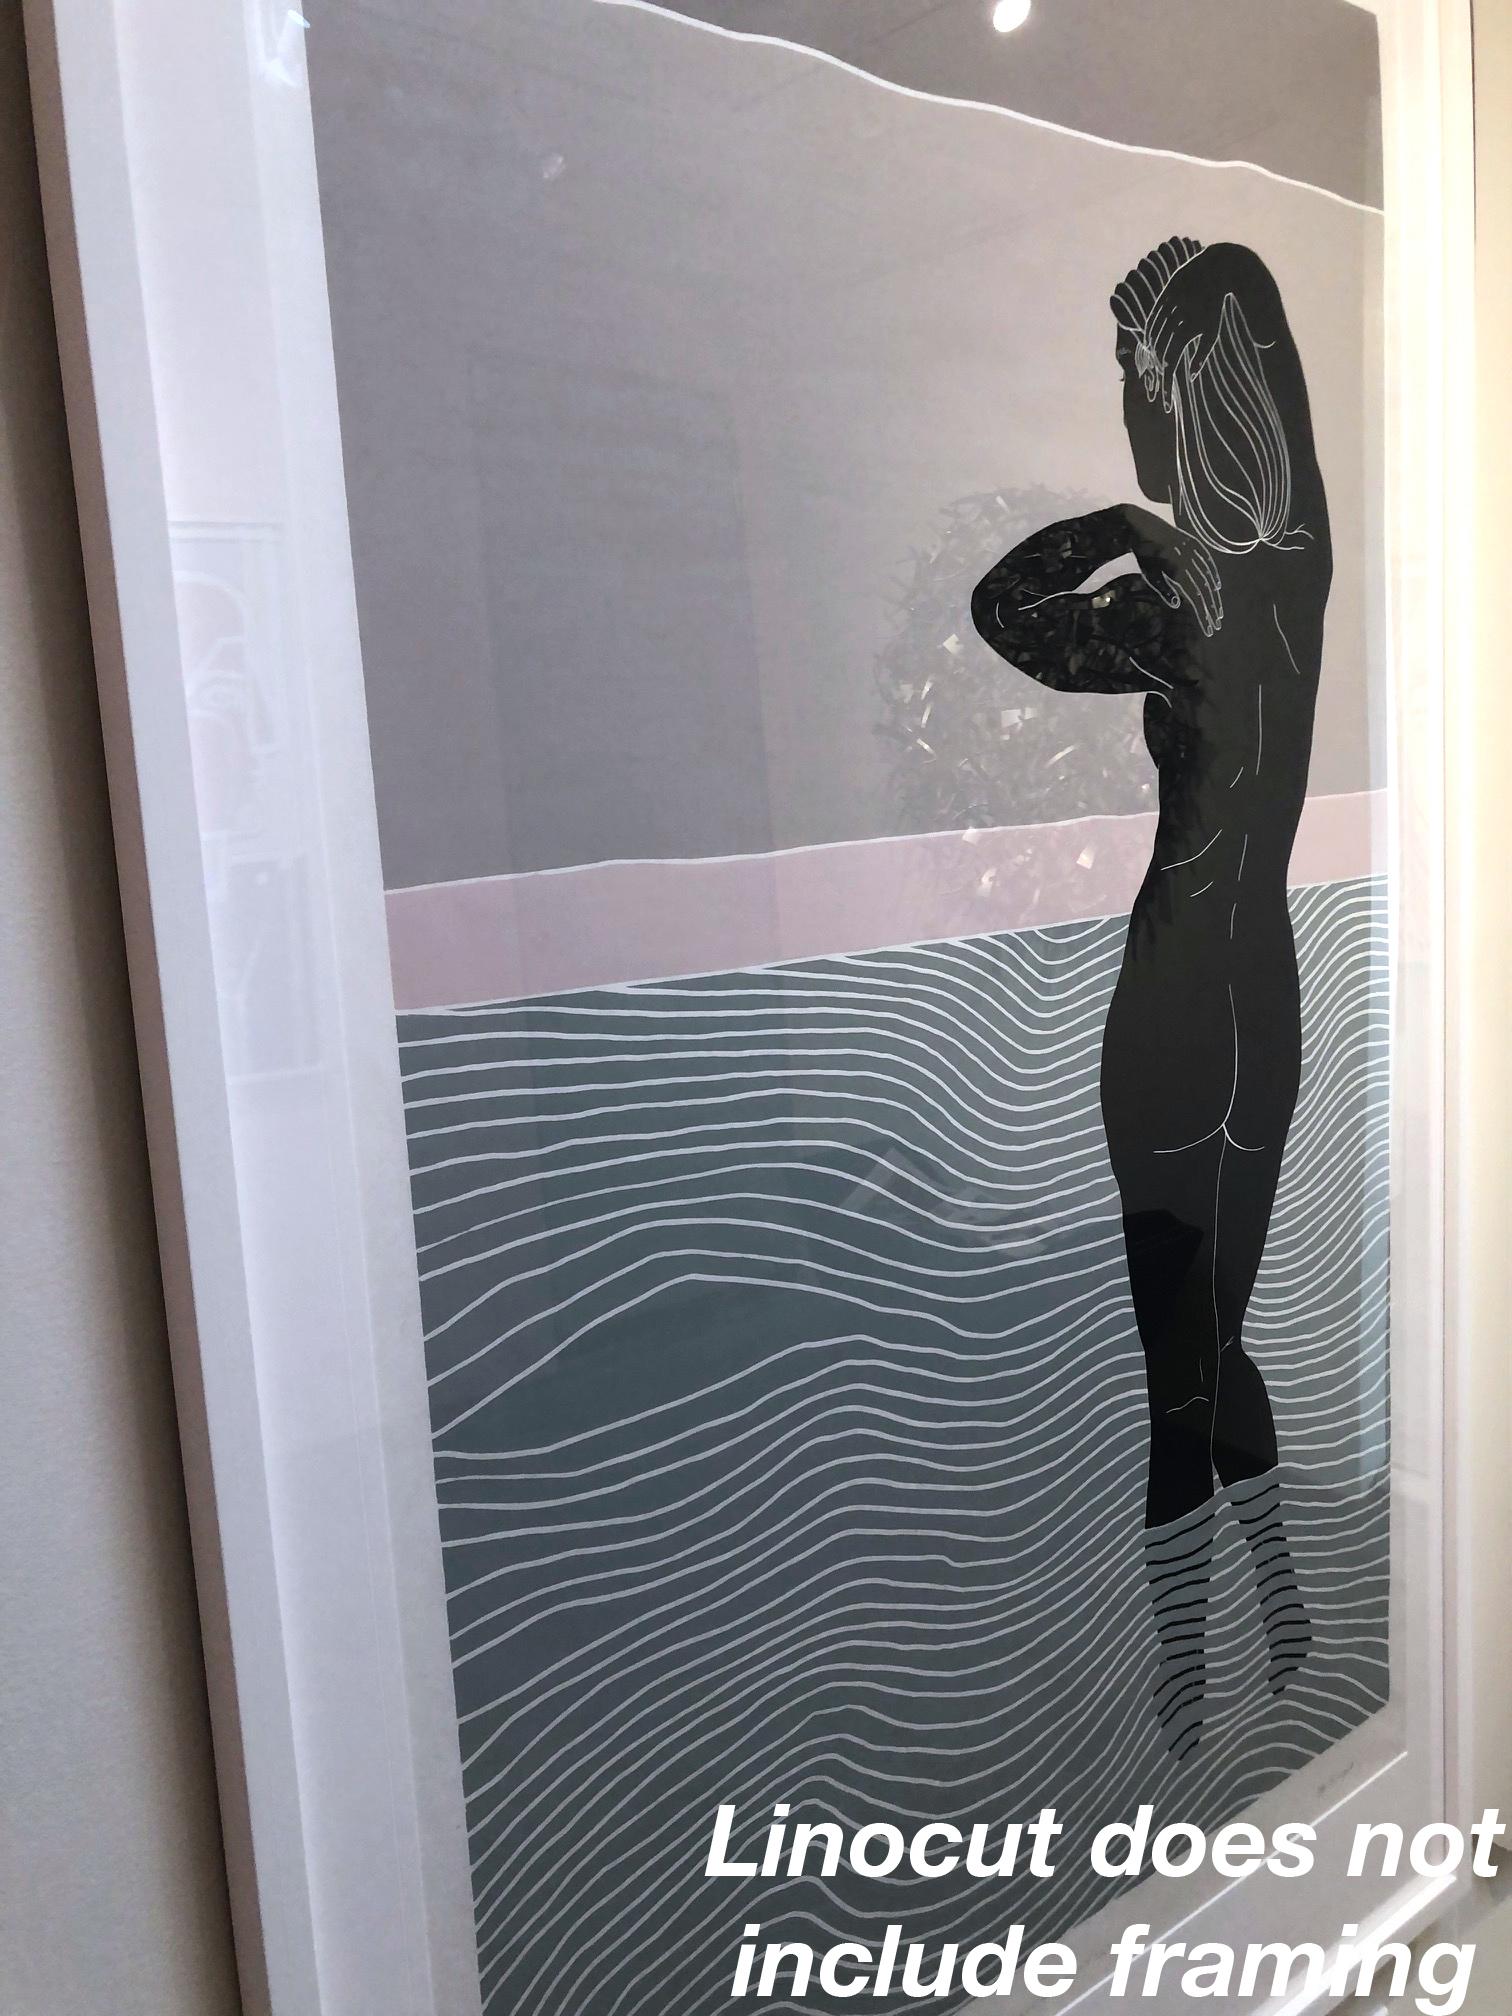 Ellen Von Wiegand’s body of work reverberates with a quest for self-assurance and serenity as she uses her own nude body within her stylized prints. In a new series of large scale, limited edition linocuts now on view at JoAnne Artman Gallery’s